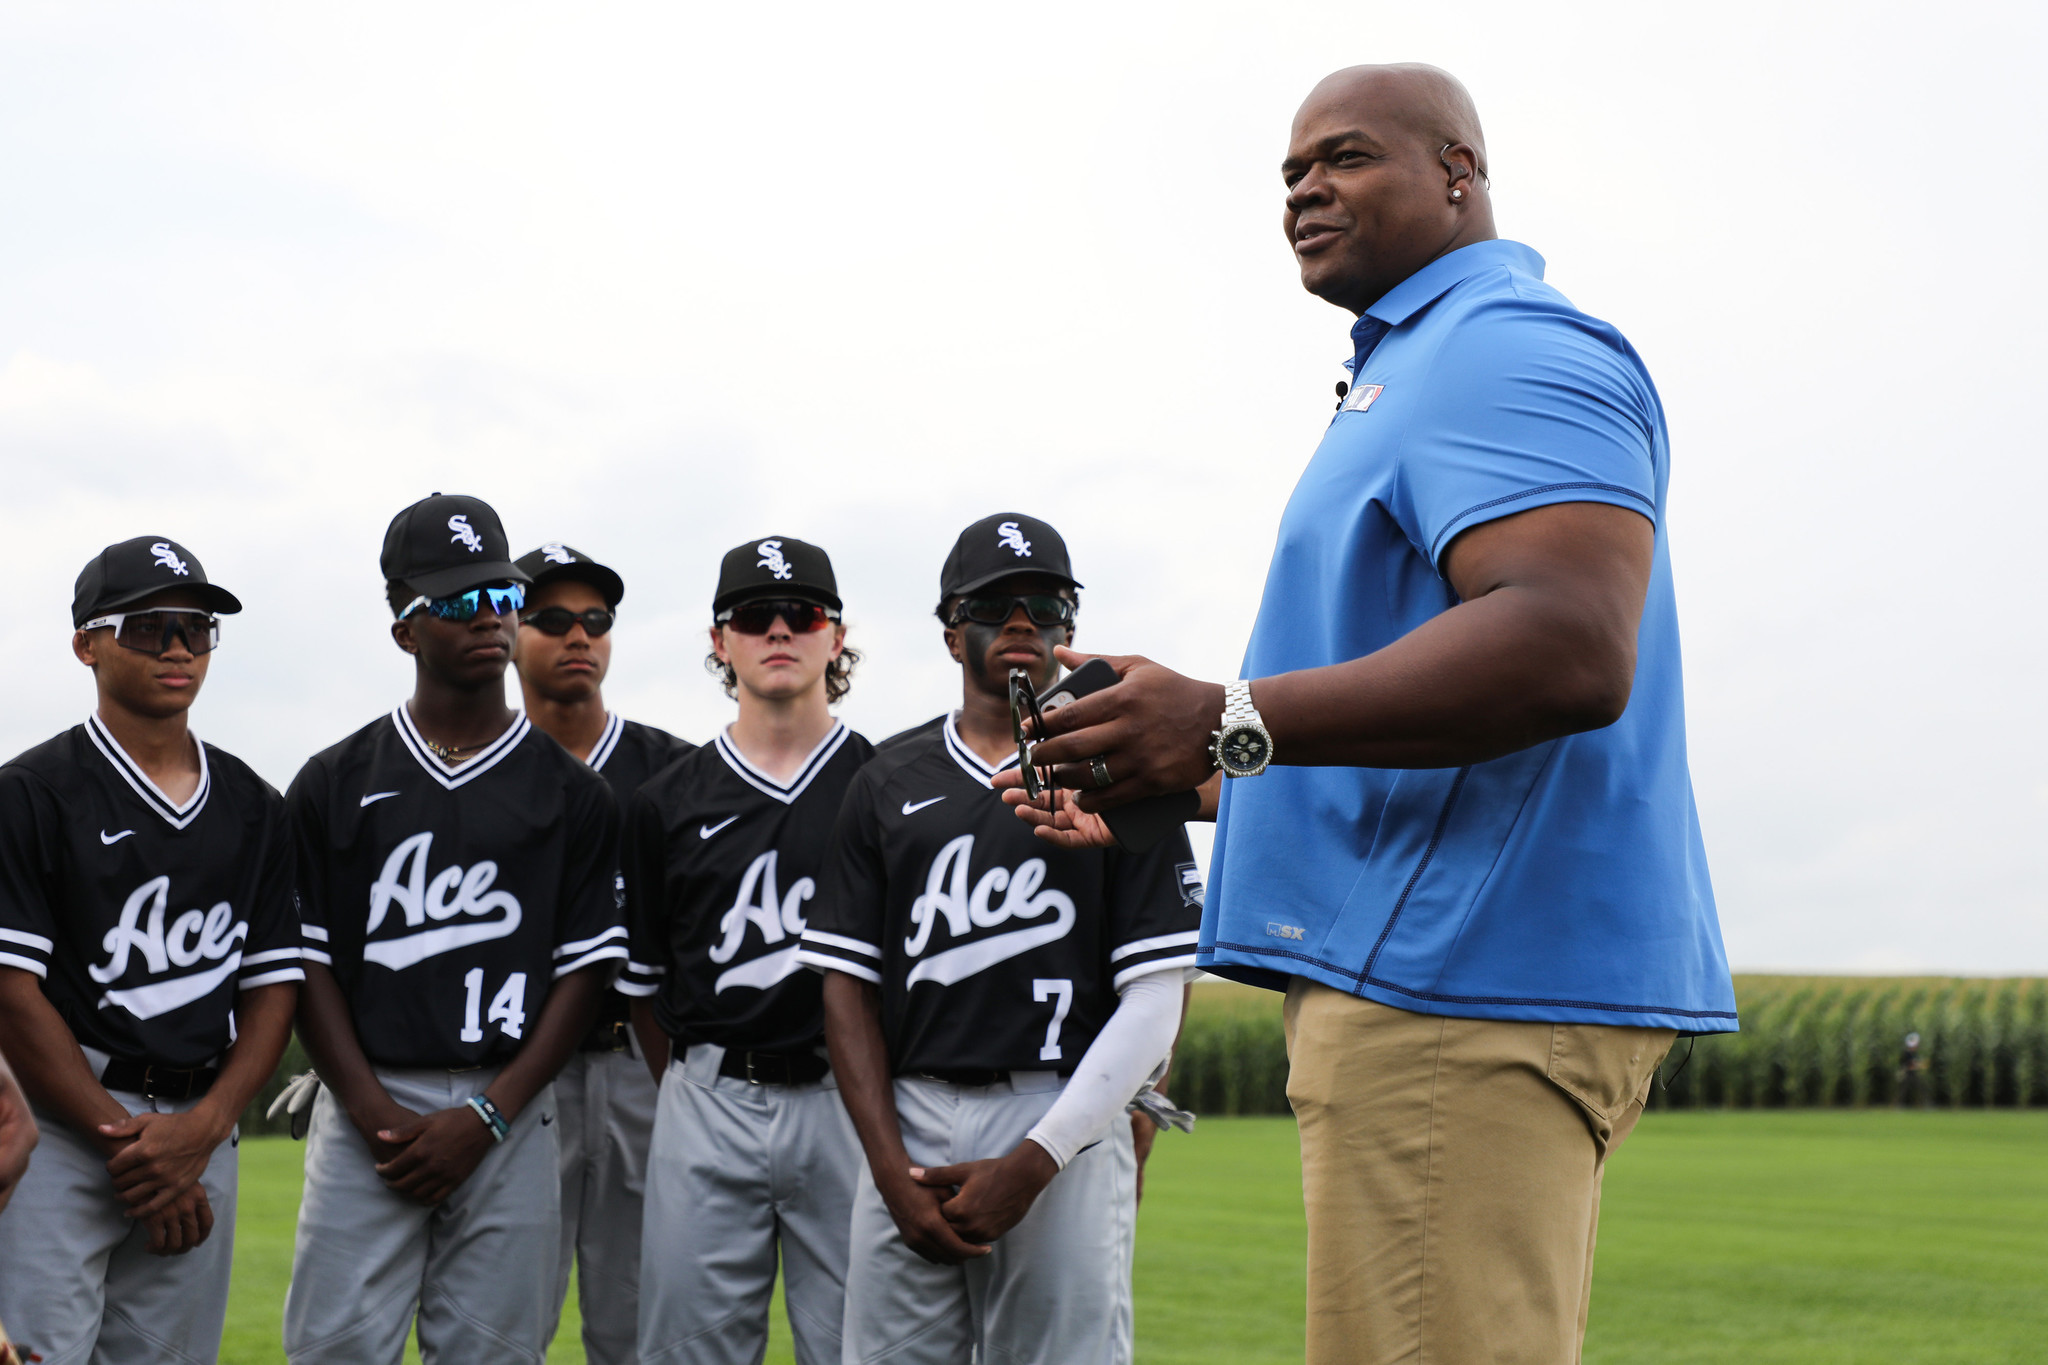 Field of Dreams' site bought by Frank Thomas-led venture